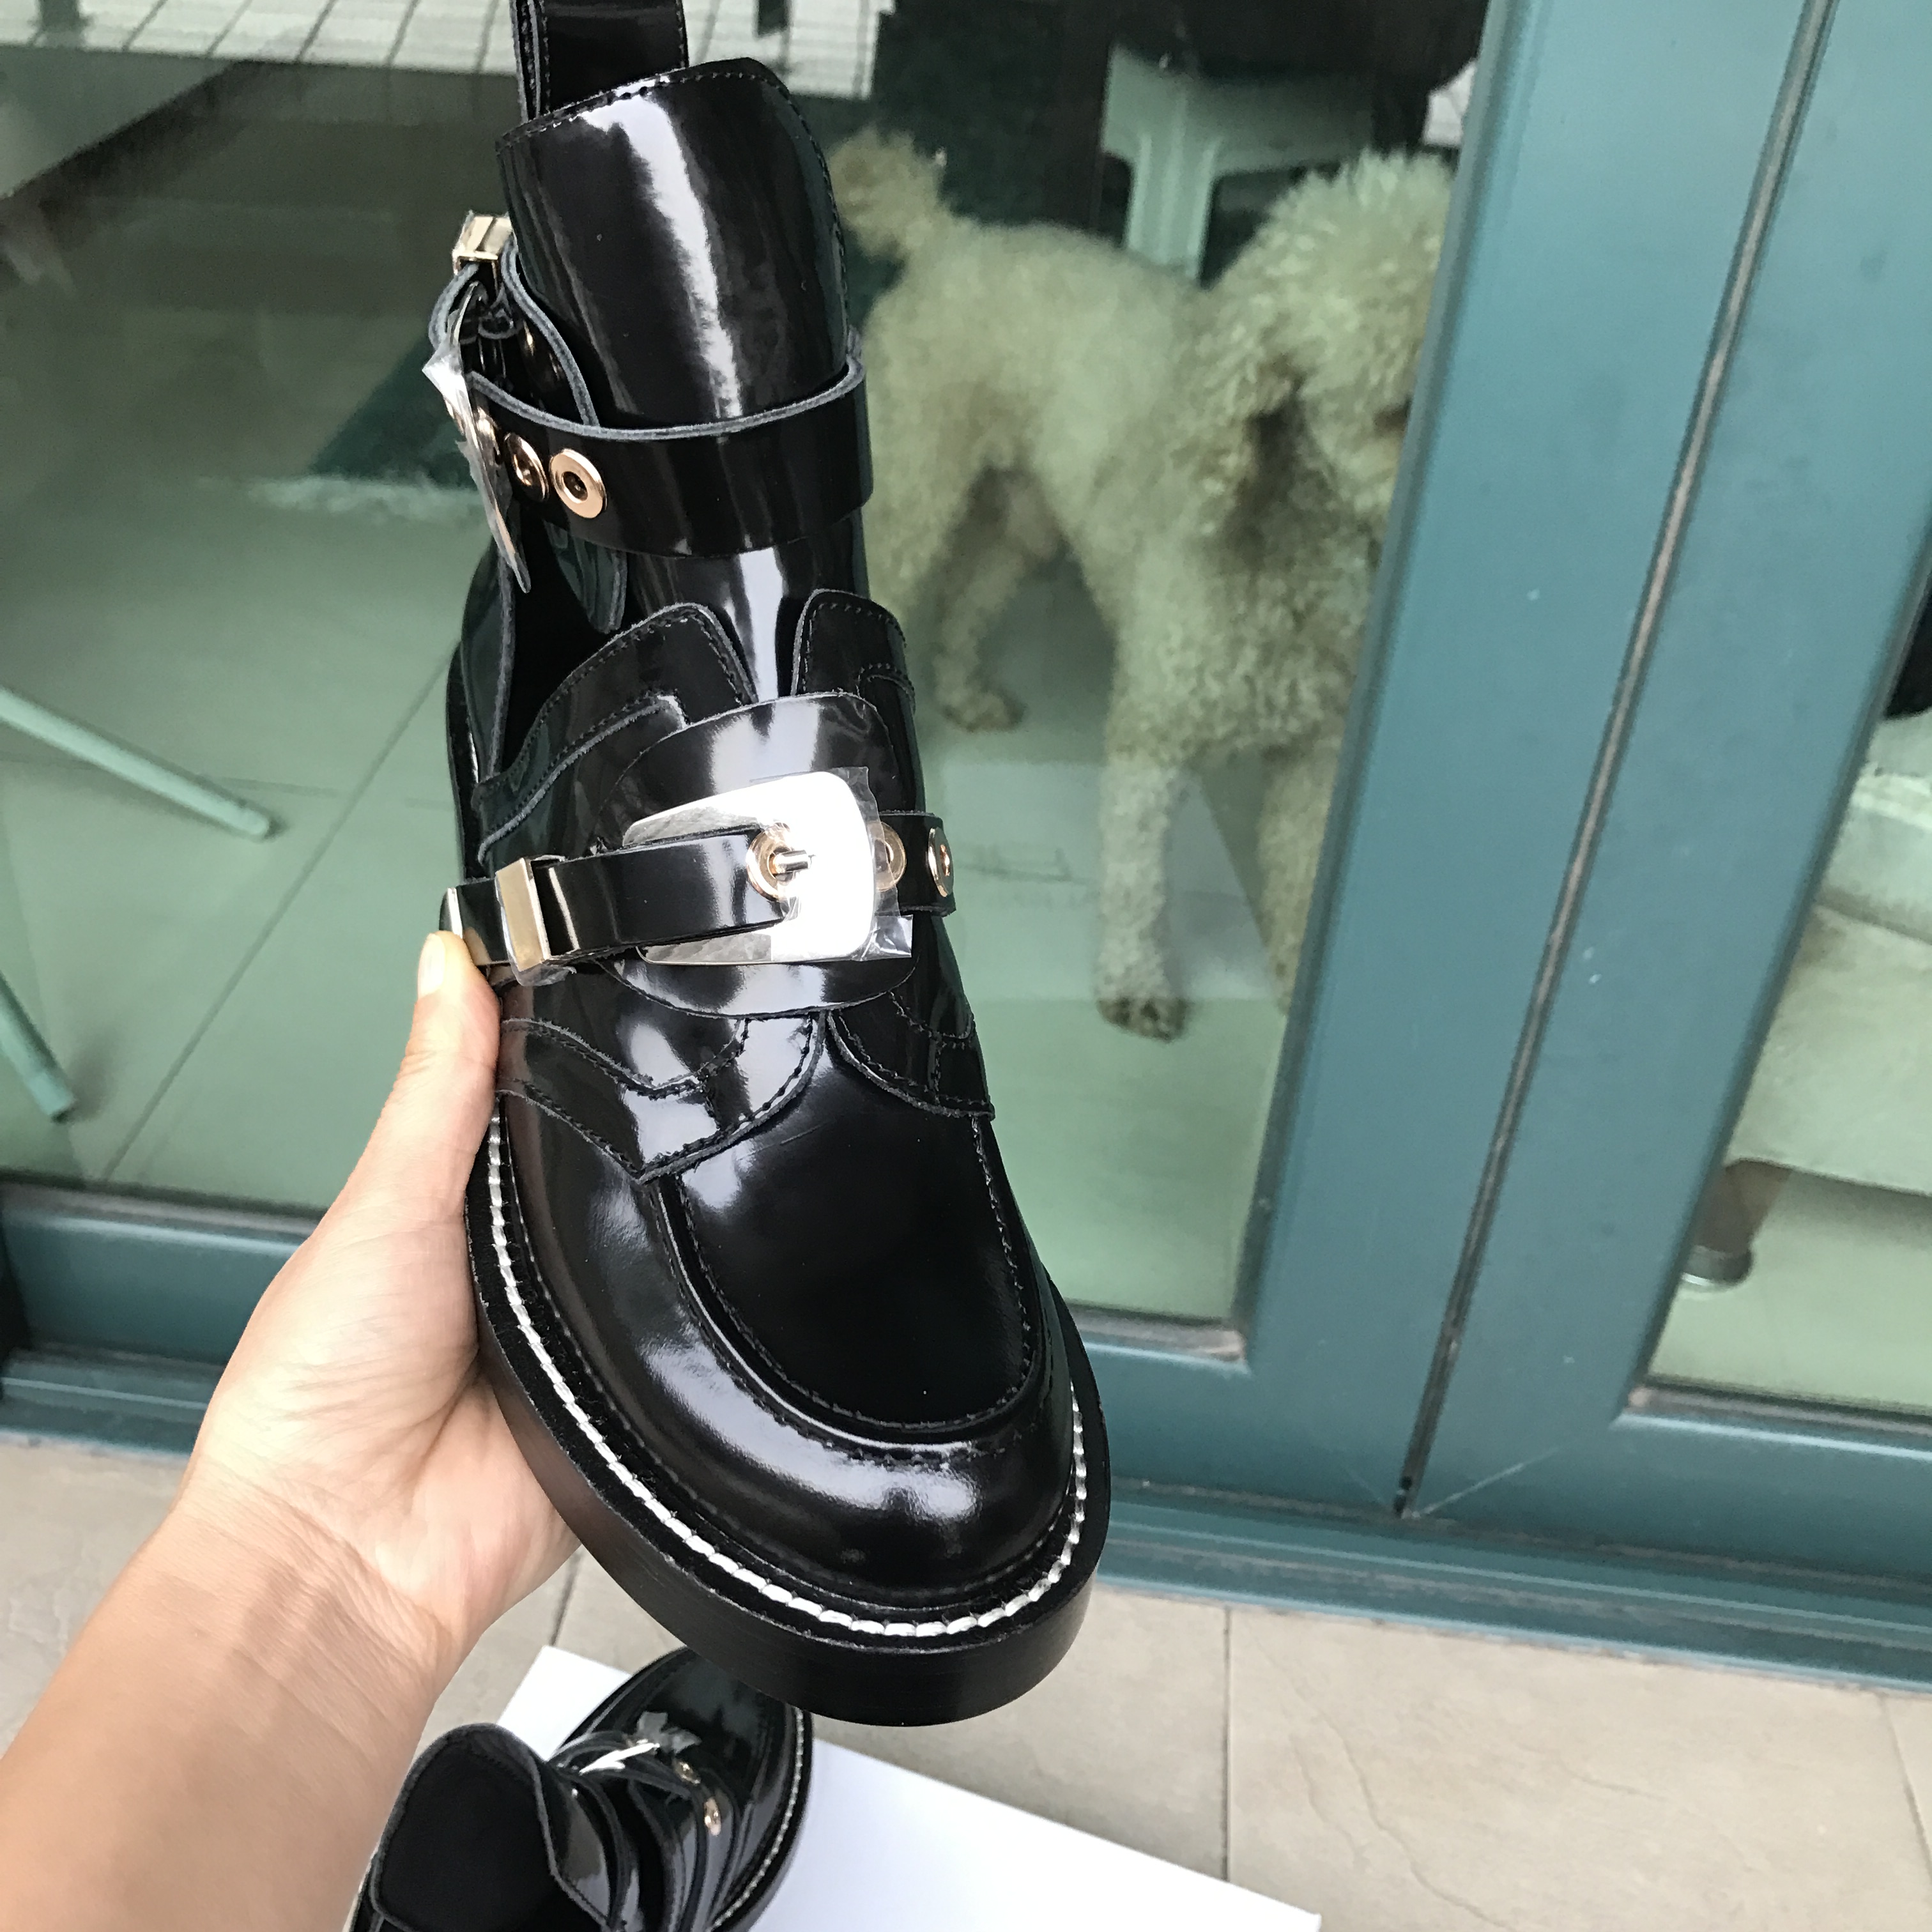 

Hot Sale- Newest High Quality Boots Women Casual Metal Buckle Ankle Women Martin Boots Casual Patent leather Western Boots British Style, Black